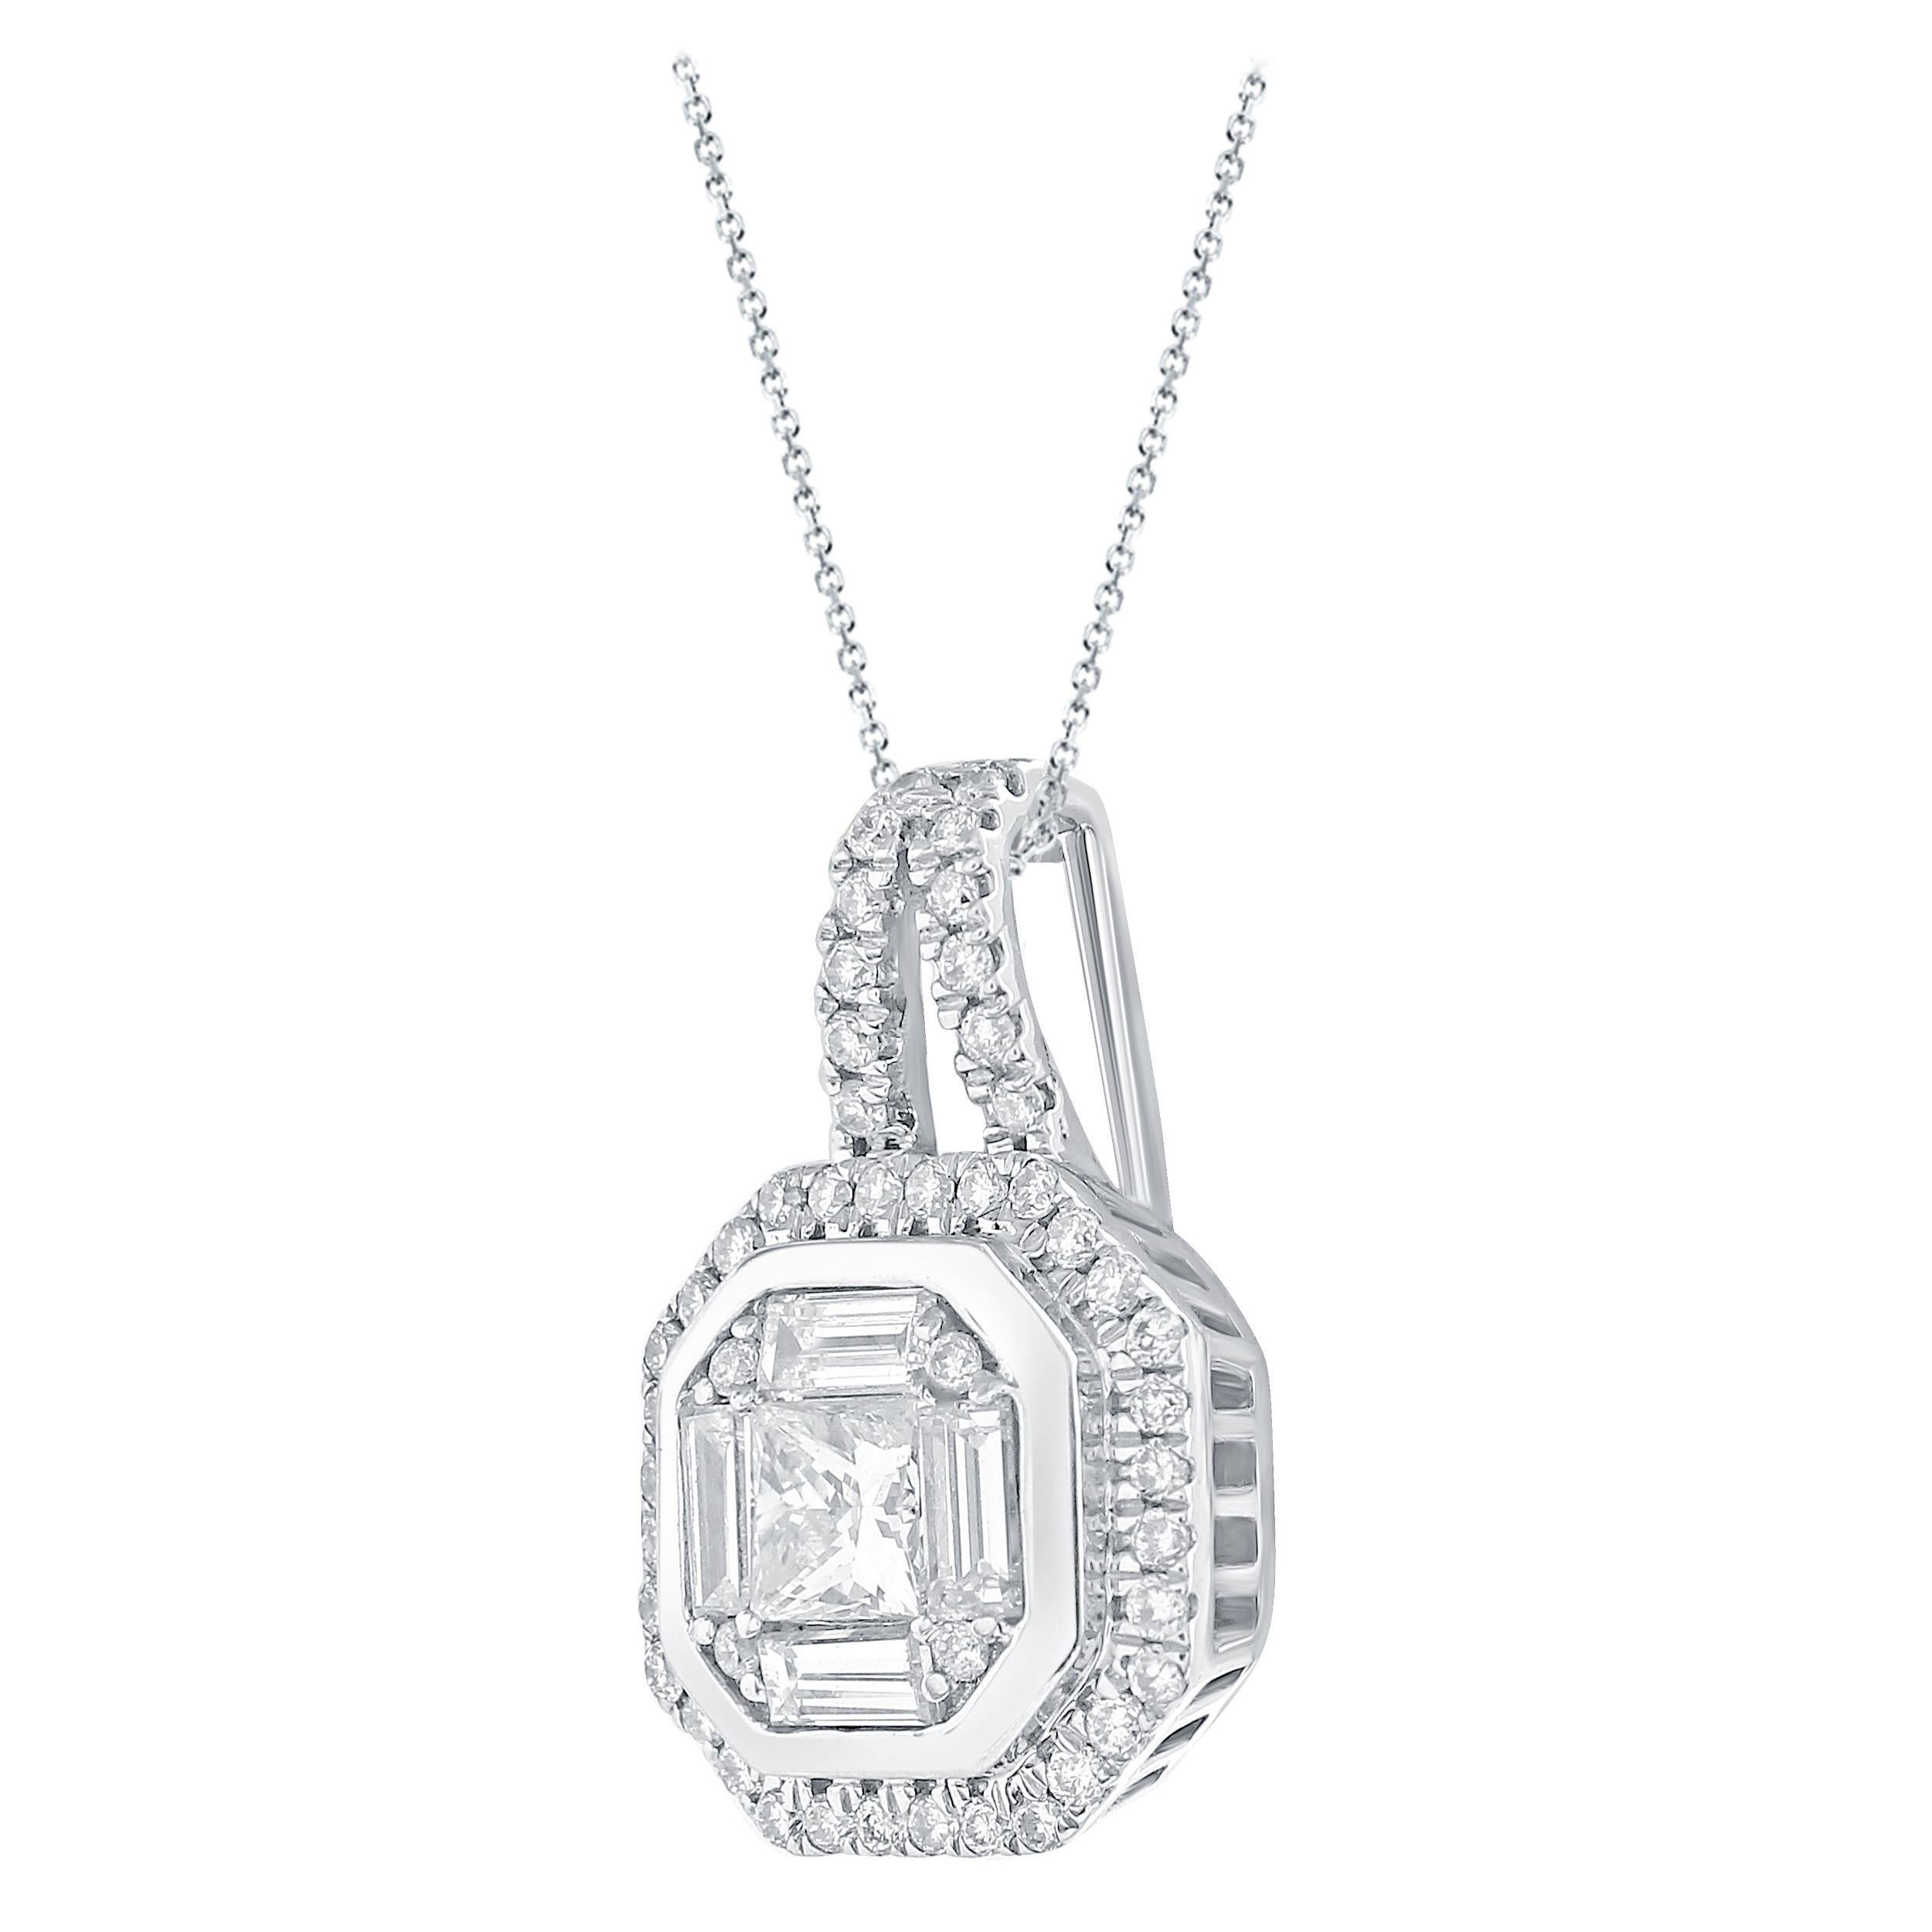 Make a statement with this stunning piece of jewelry. Each certified diamond is carefully set. All high quality and ethically sourced diamonds are IGI Certified.
Cttw : 0.51 cttw
Kt : 18Kt
Stone Clarity :  GH/Si-I1
